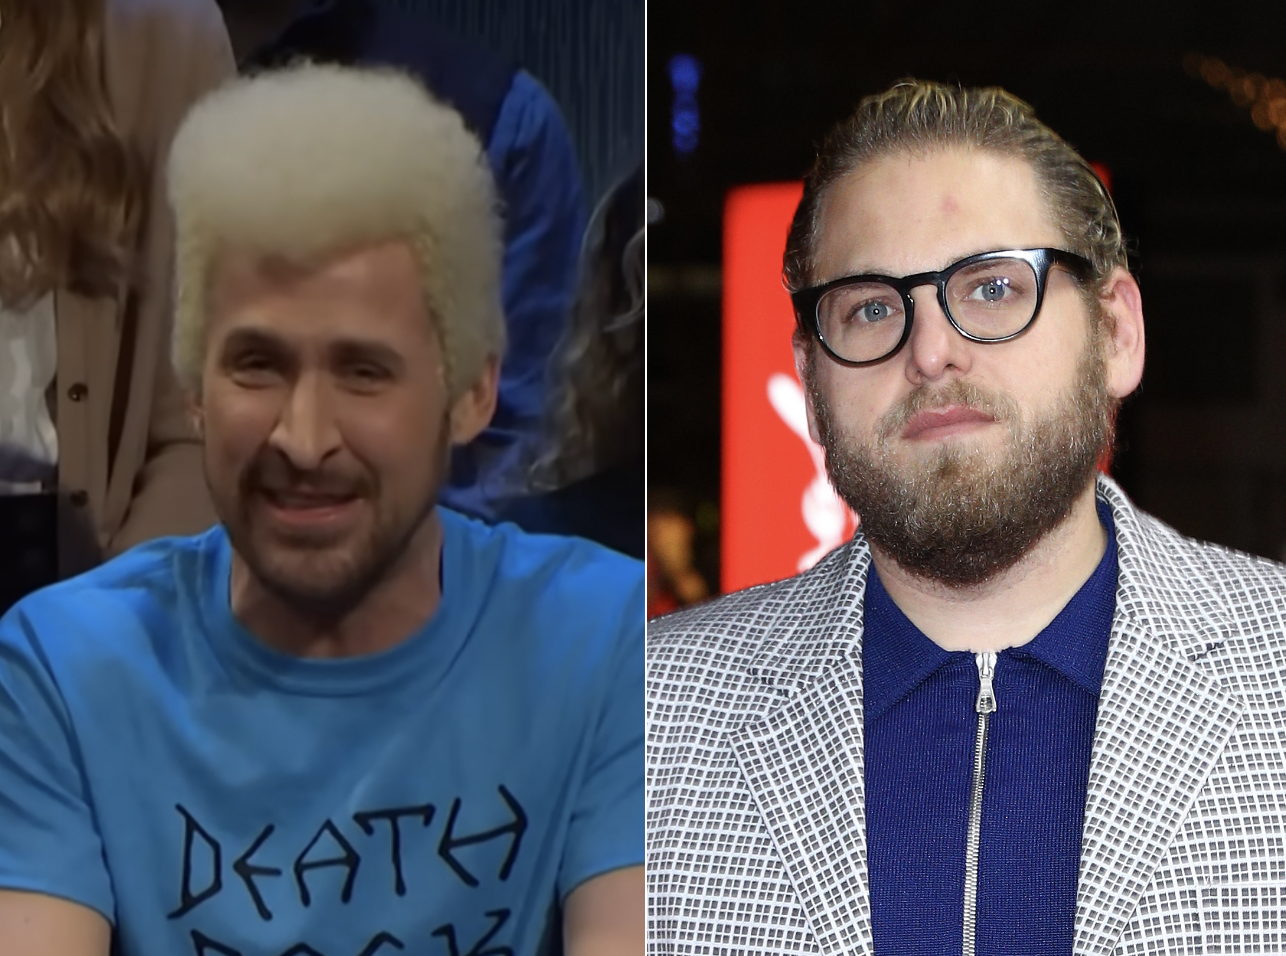 SNL’s ‘Beavis and Butt-Head’ Sketch Was Originally Pitched for Jonah Hill in 2018, Reveals Crew: ‘We Fully Gave Up on It’ and Thought...